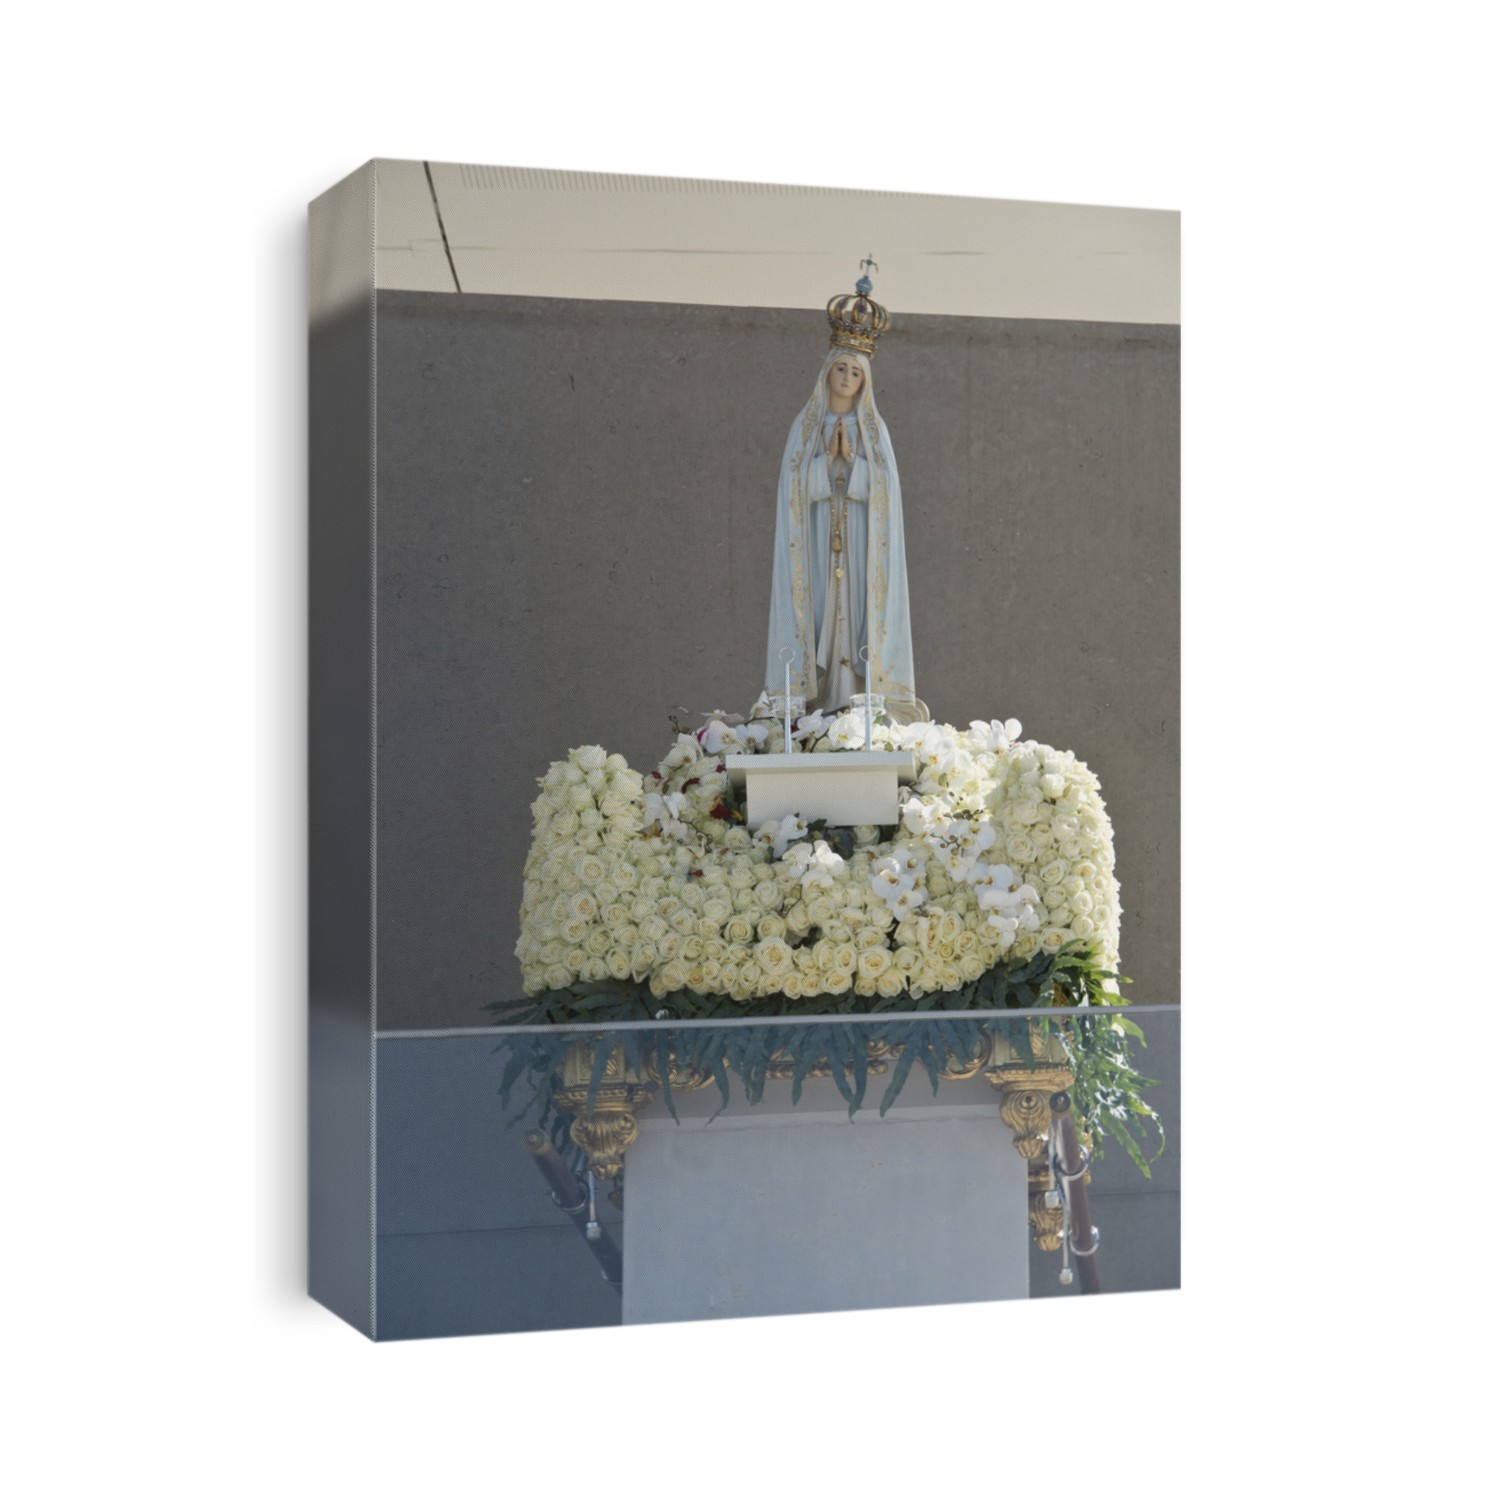 The image of Our Lady of Fatima at the altar in the Sanctuary of Our Lady of Fatima, Portugal.